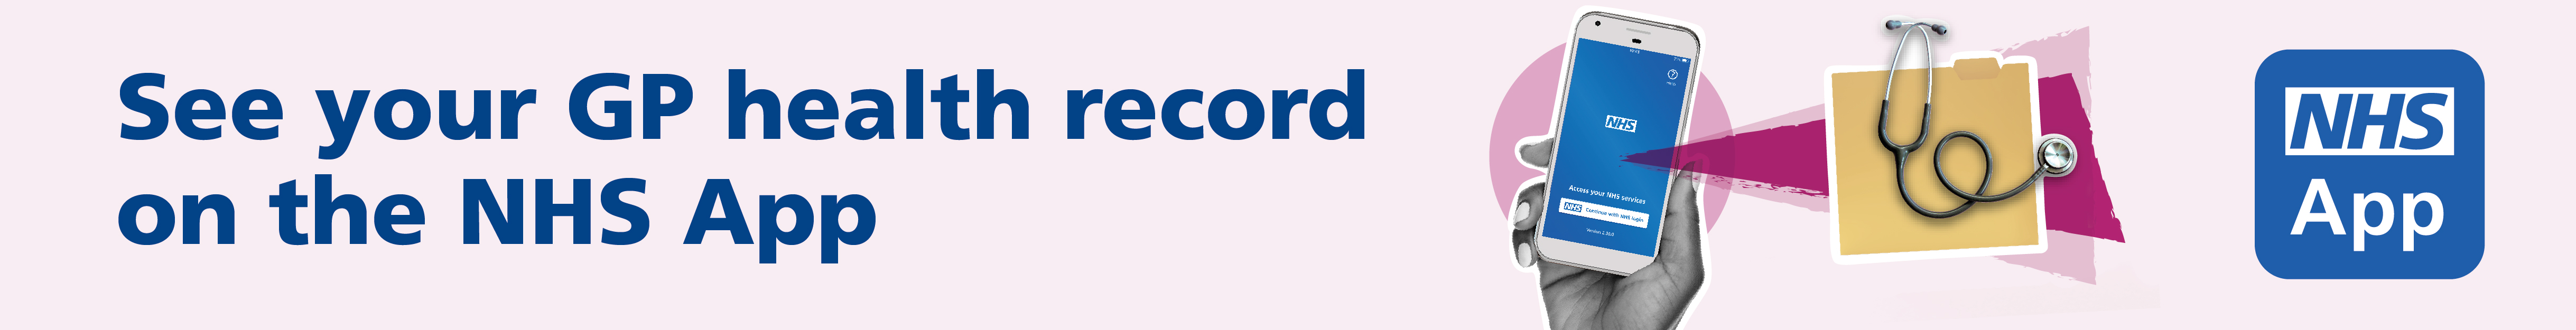 See your GP health record on the NHS app